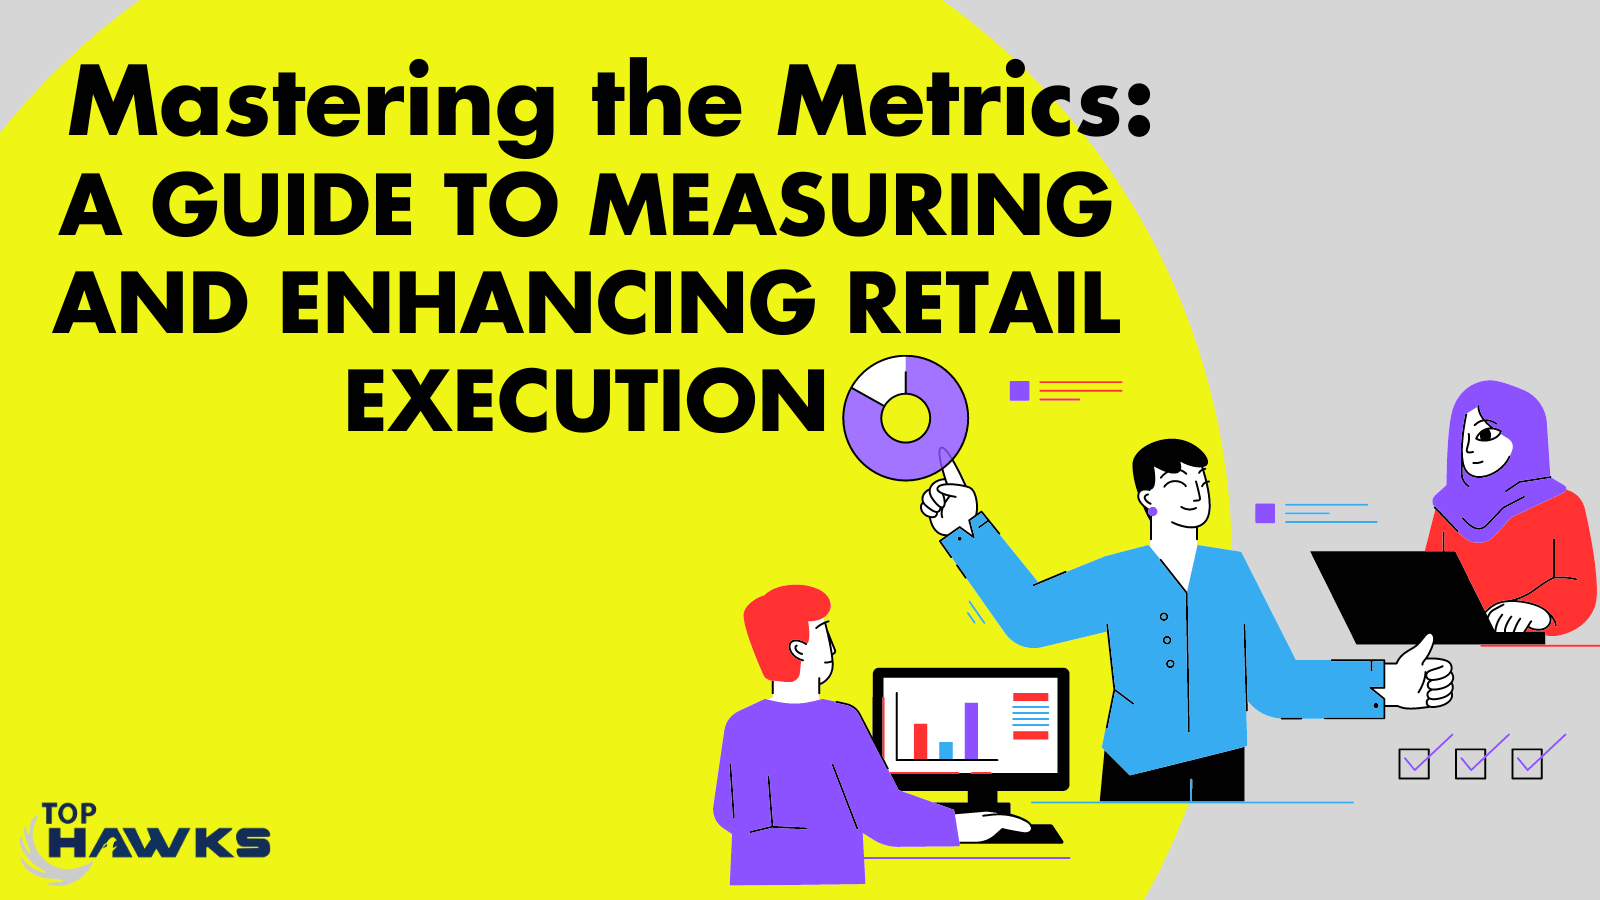 Mastering the Metrics A Guide to Measuring and Enhancing Retail Execution banner image